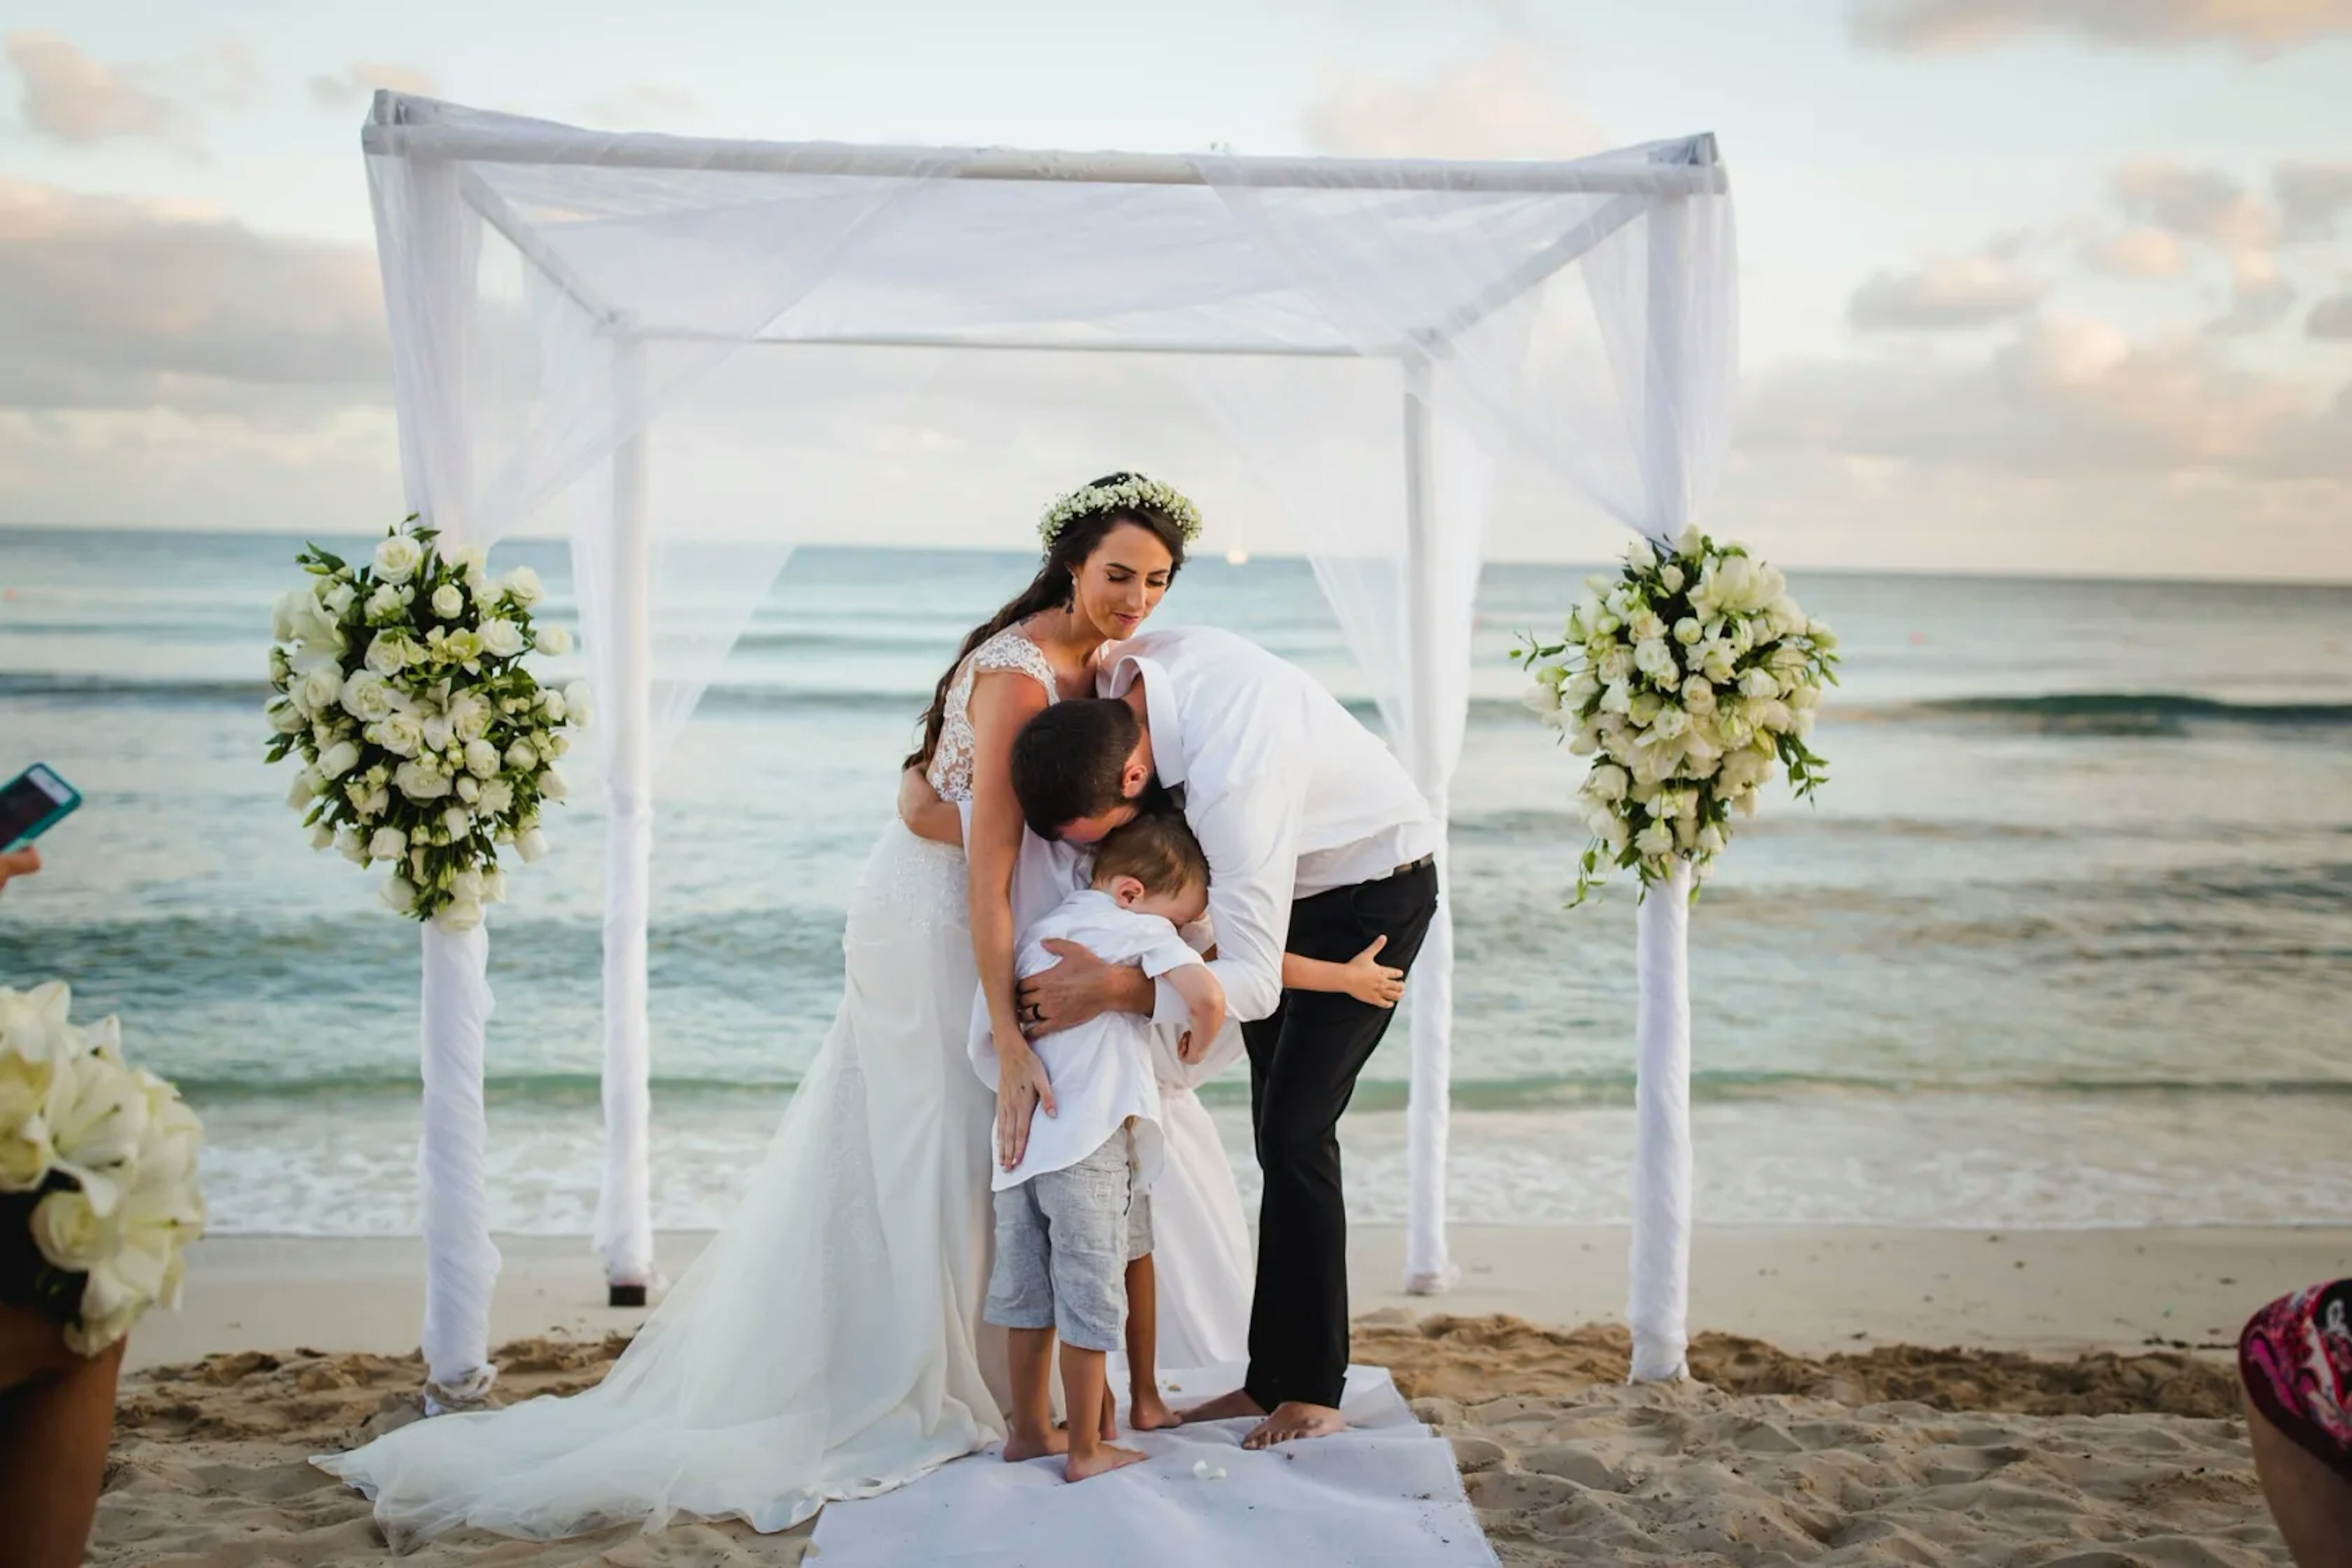 A family moment at a beach wedding: A bride with a flower crown and a groom in white embrace a young child, under a sheer white canopy adorned with flowers, with the ocean as a serene backdrop.